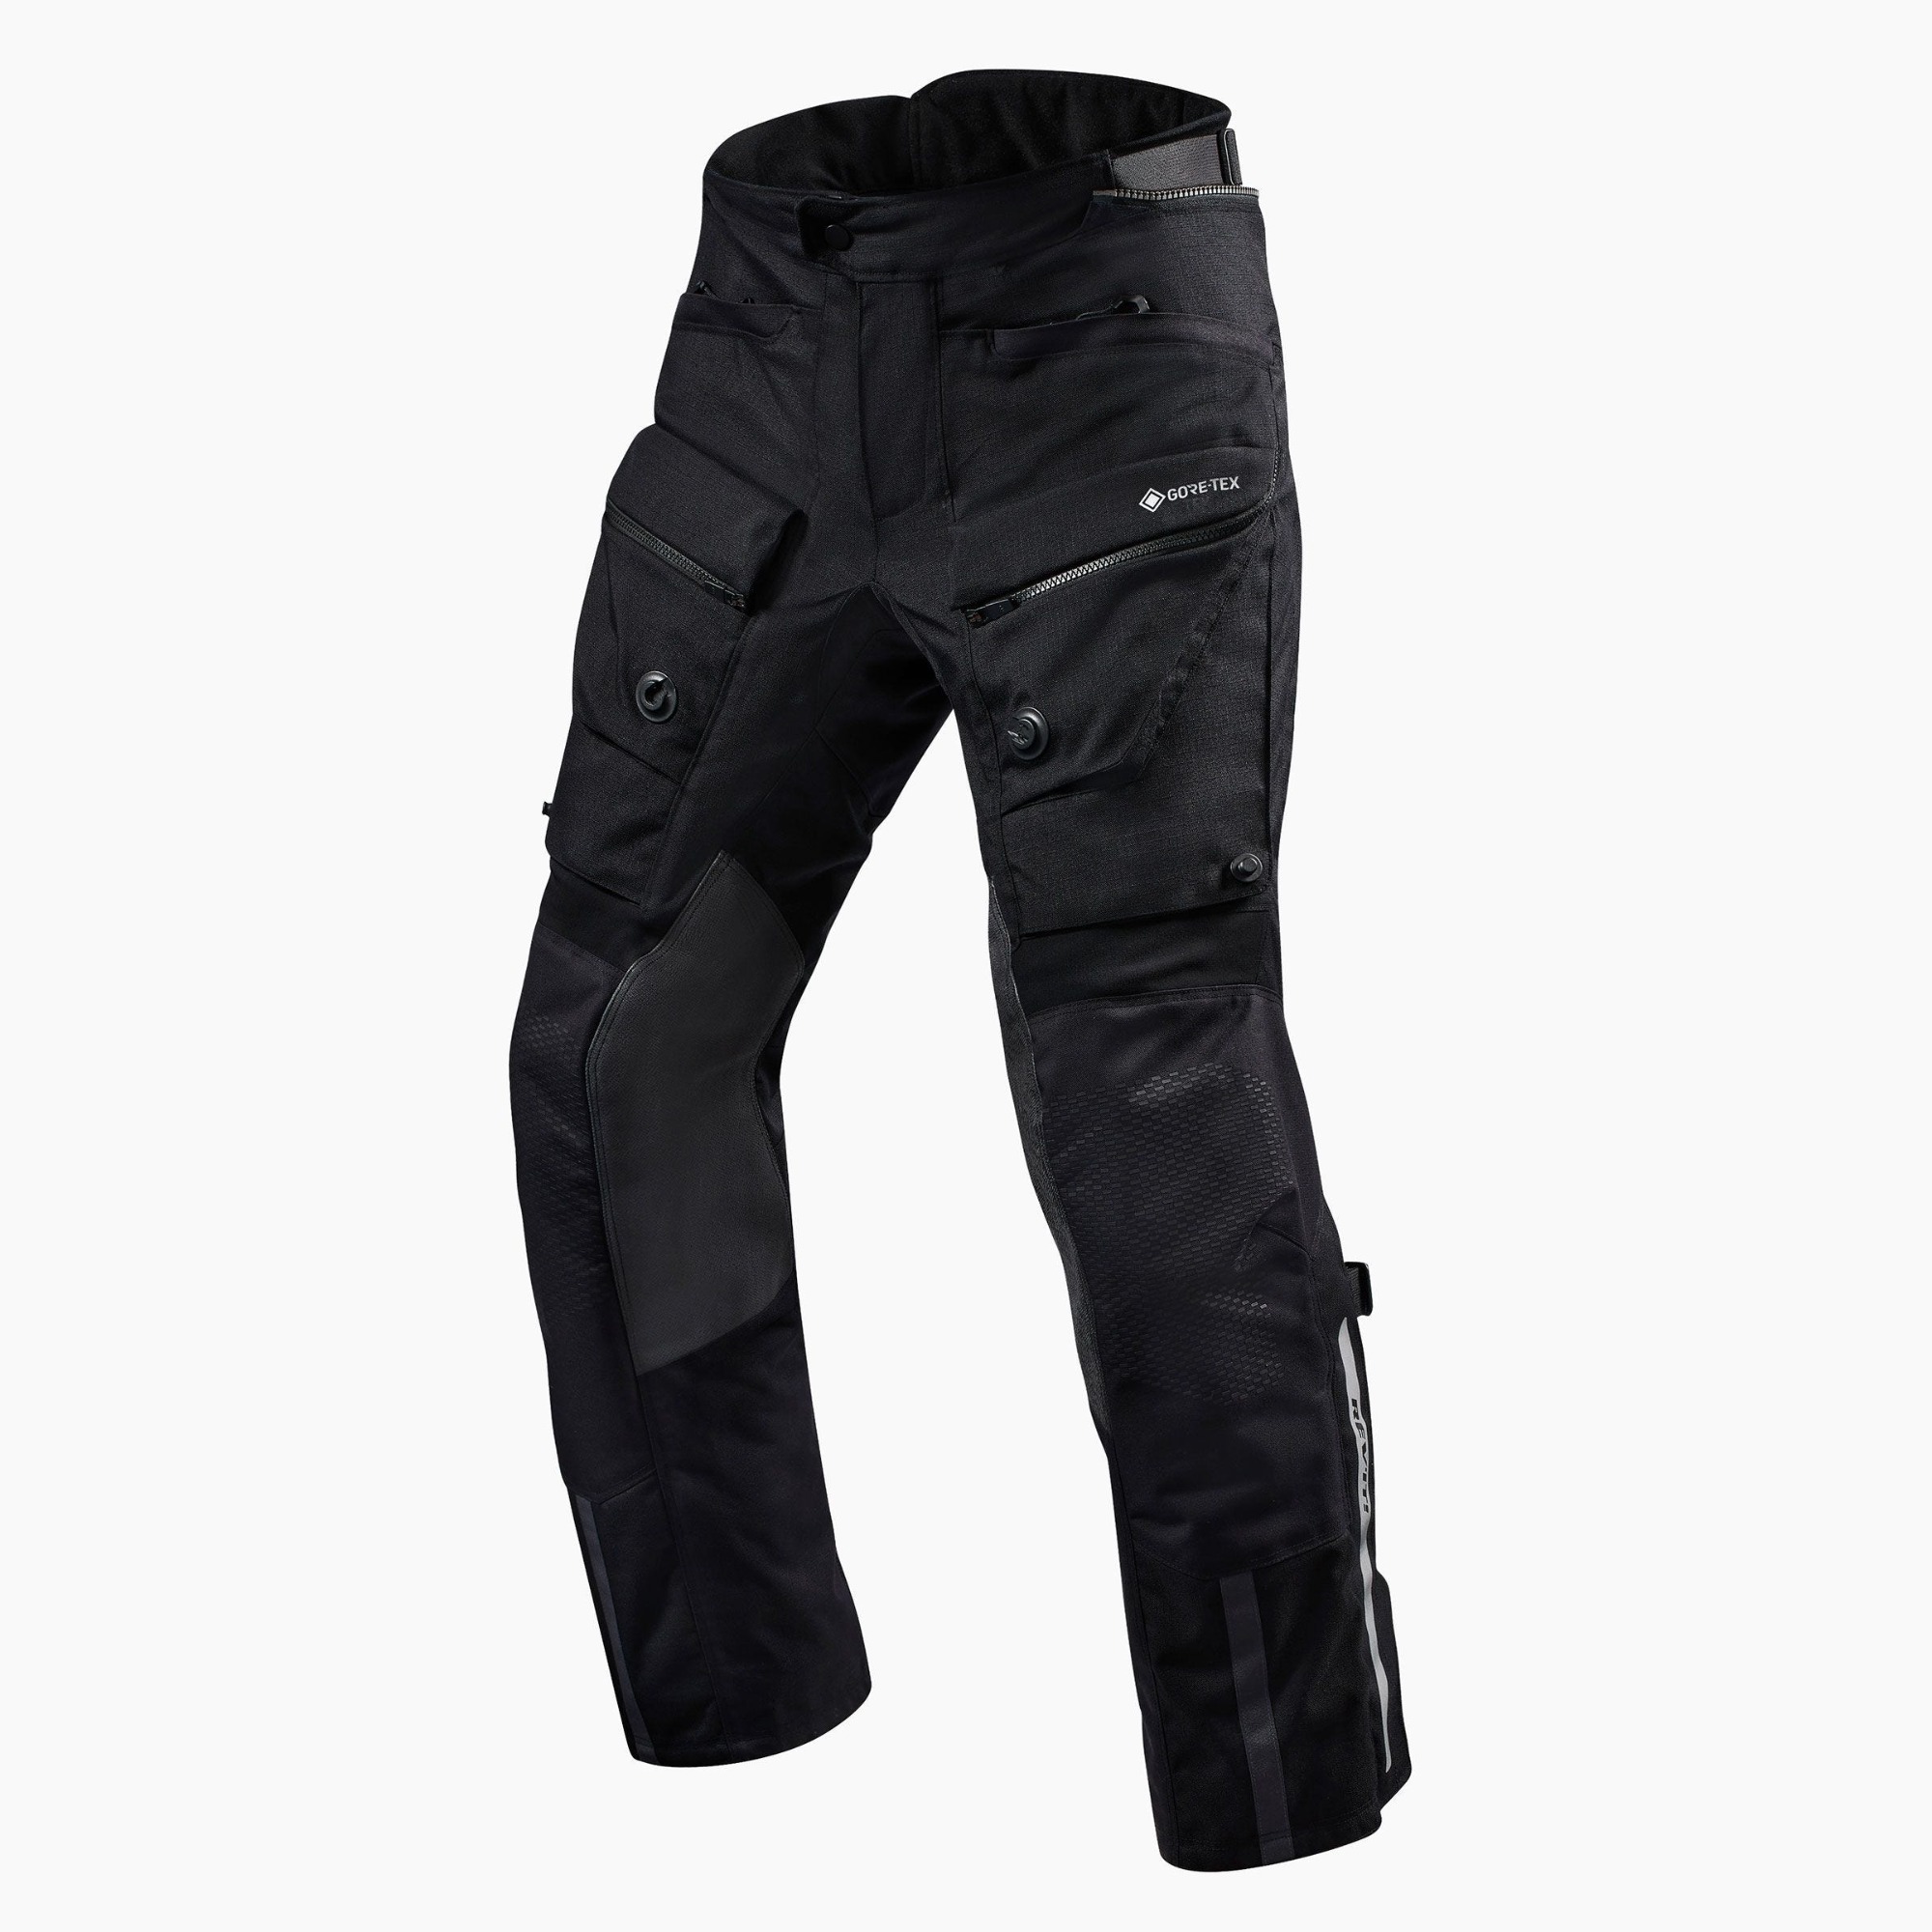 Image of REV'IT! Trousers Defender 3 GTX Black Short Motorcycle Pants Size L ID 8700001319867